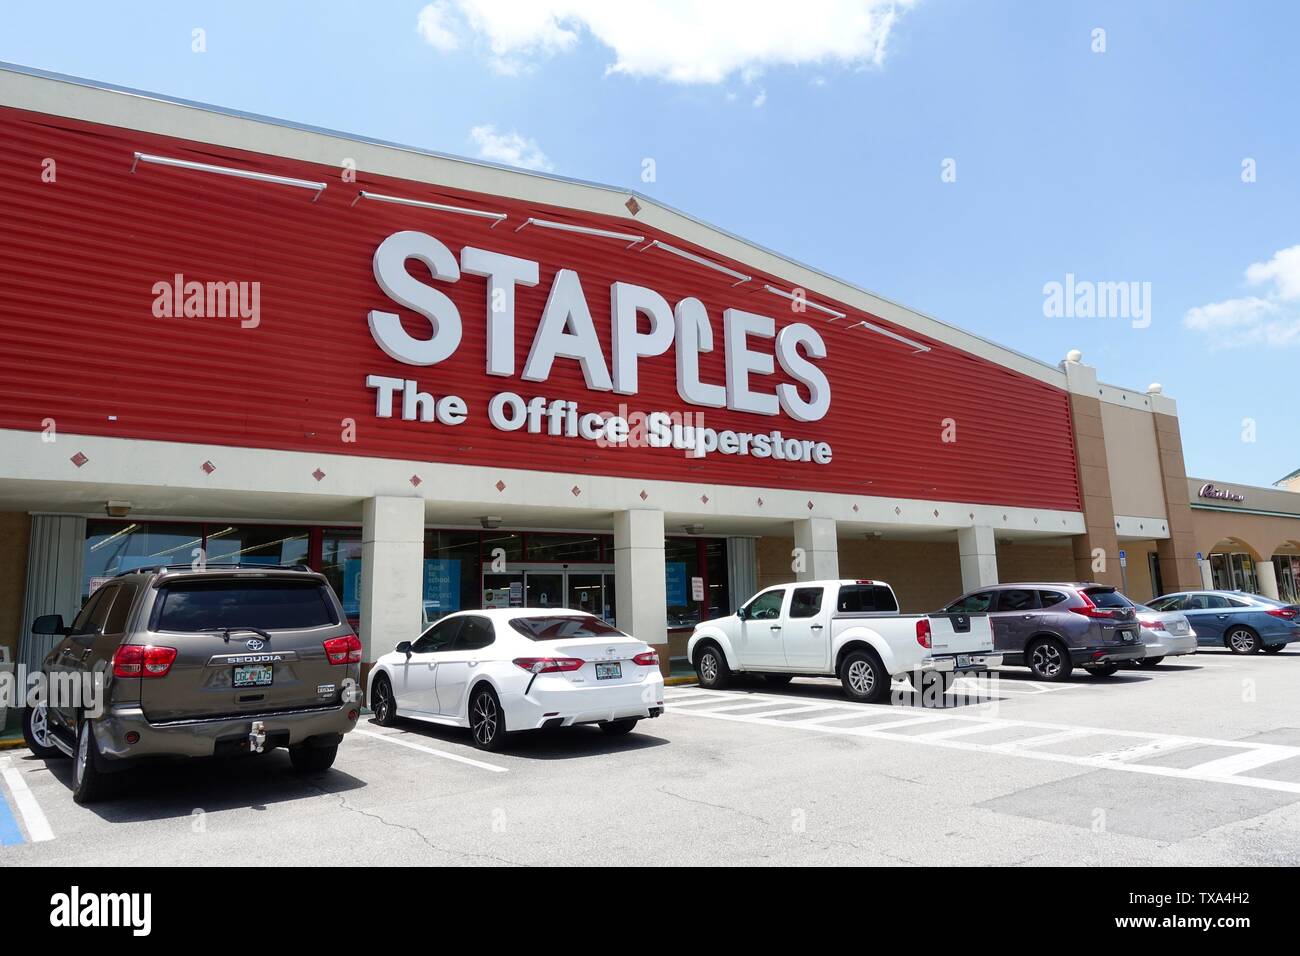 Ft. Pierce,FL/USA-6/23/19: An exterior view of a staples store. Staples Inc. is a Massachusetts-based office supplies and products retail company. Stock Photo